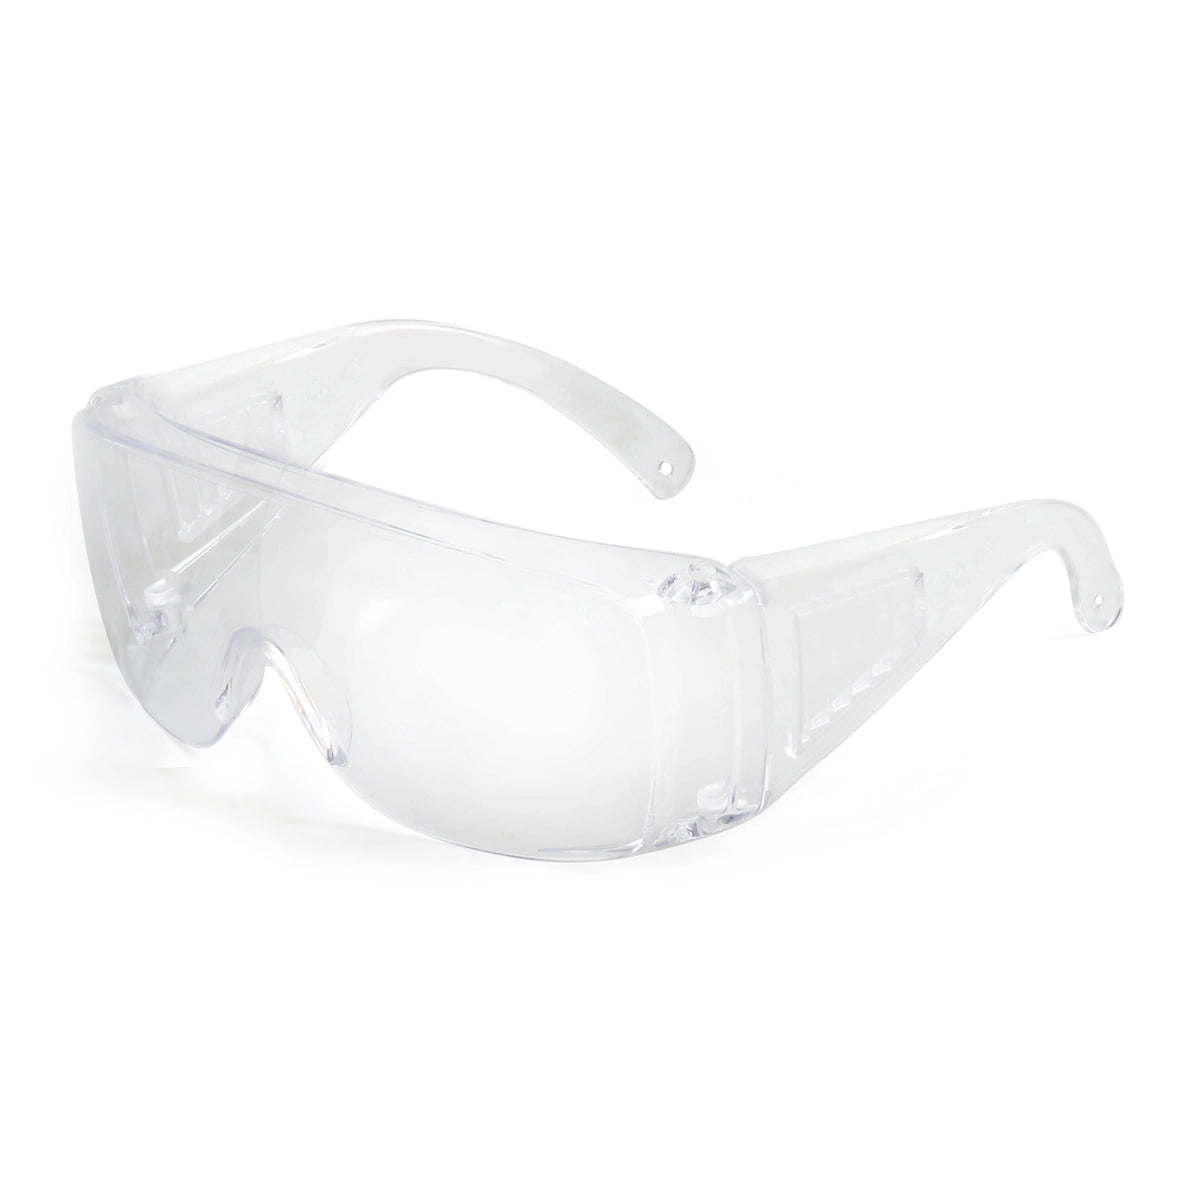 Hyper Tough Fit-over Safety Glass Z87.1 Poly-Carbonate Lens